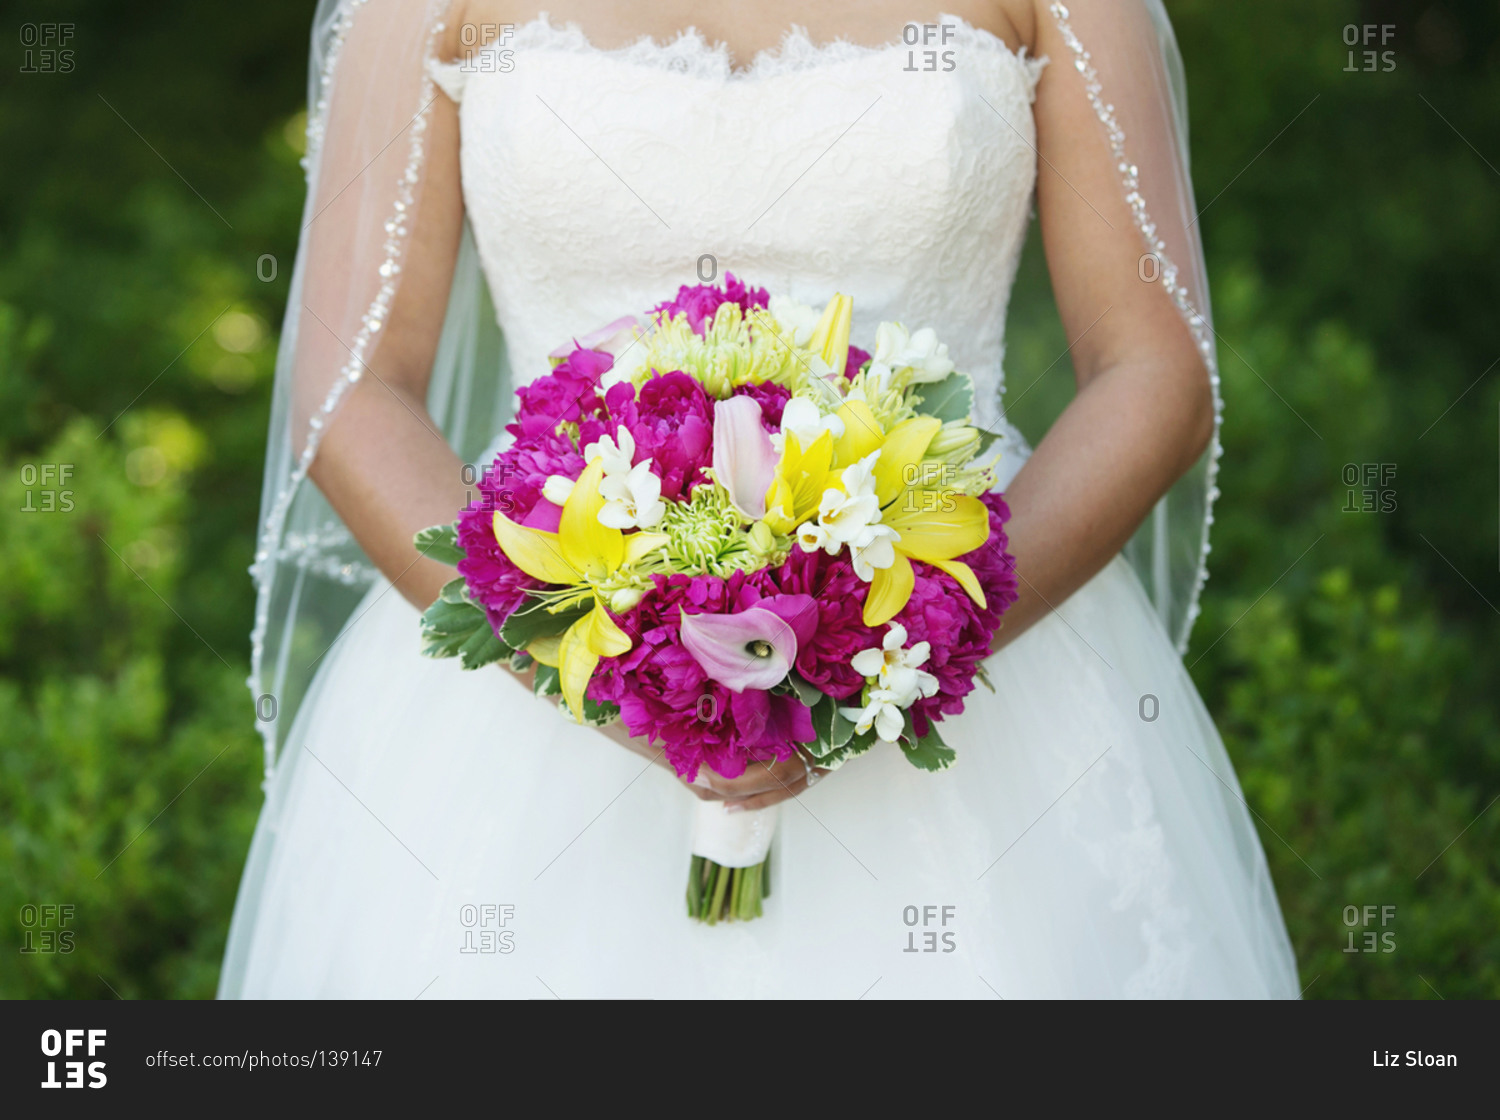 Midsection view of bride holding a bouquet